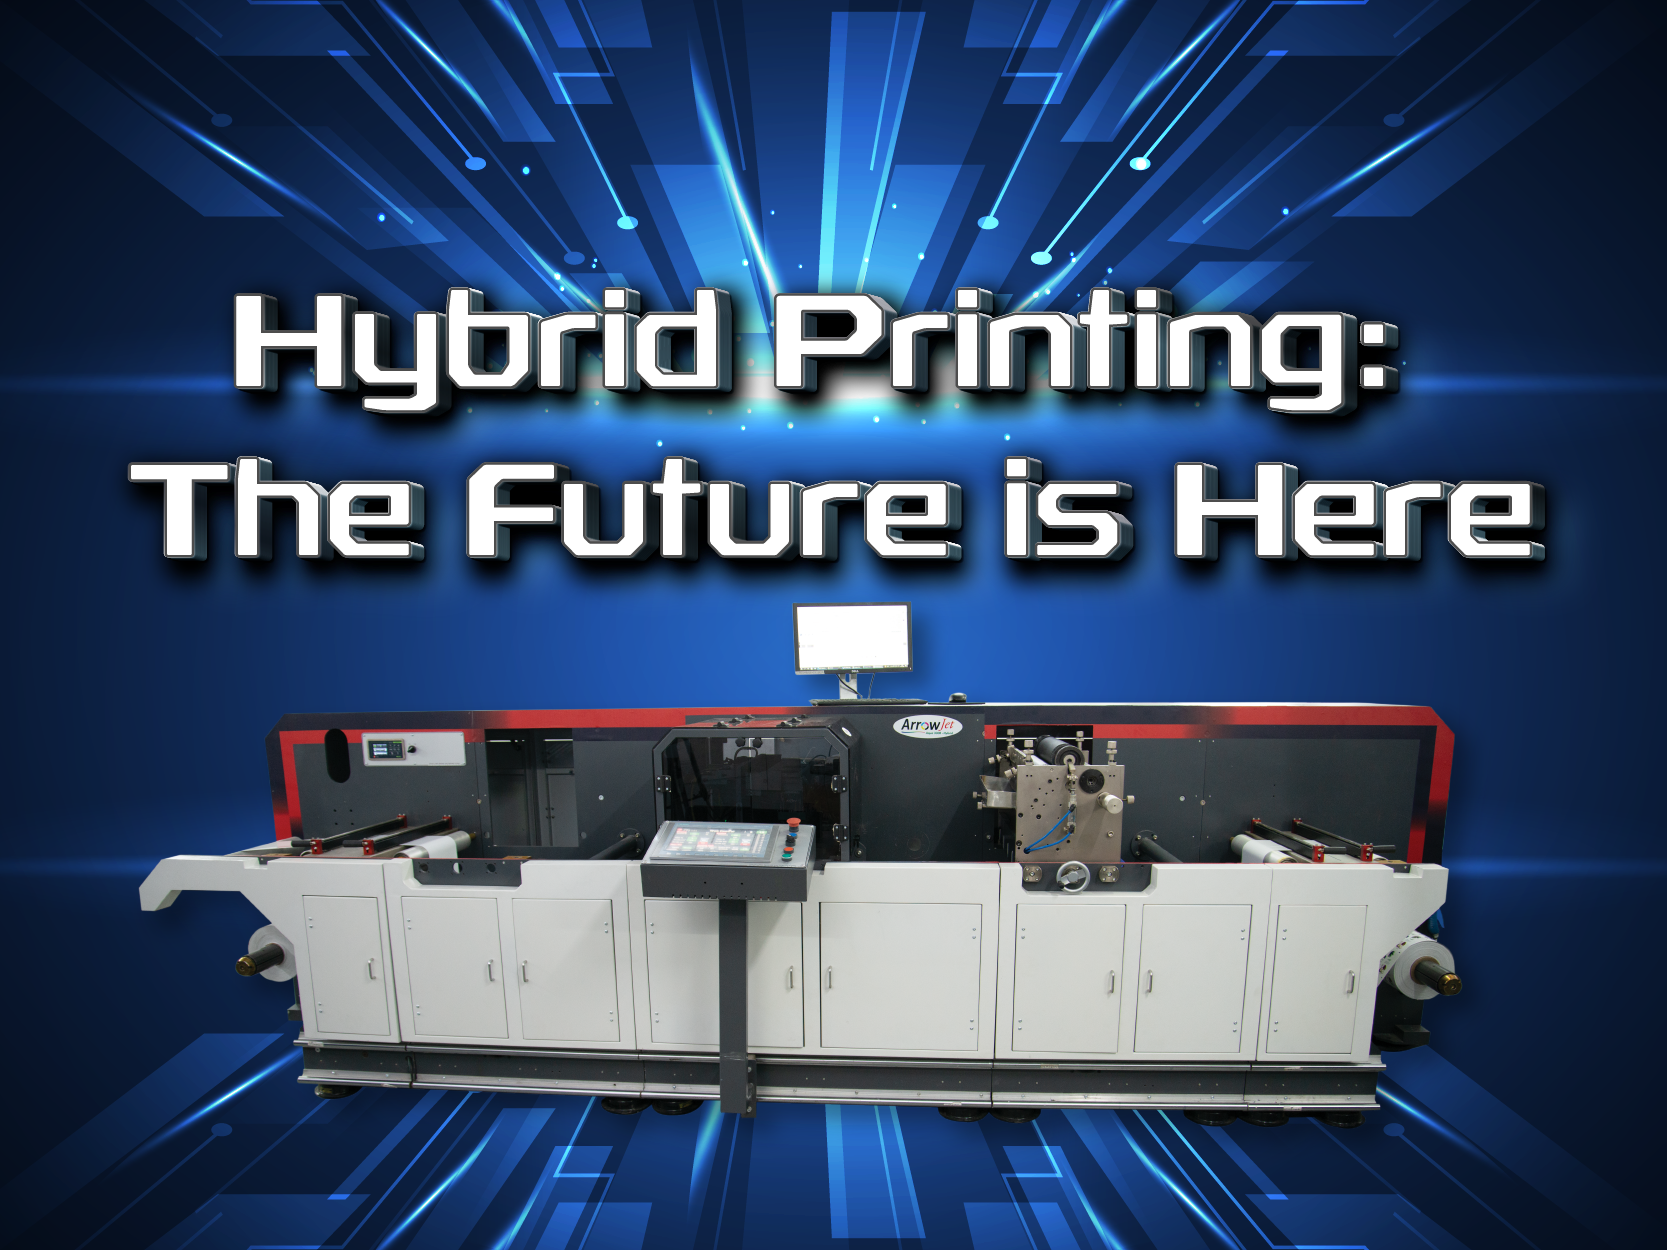 Hybrid Printing The Future is here